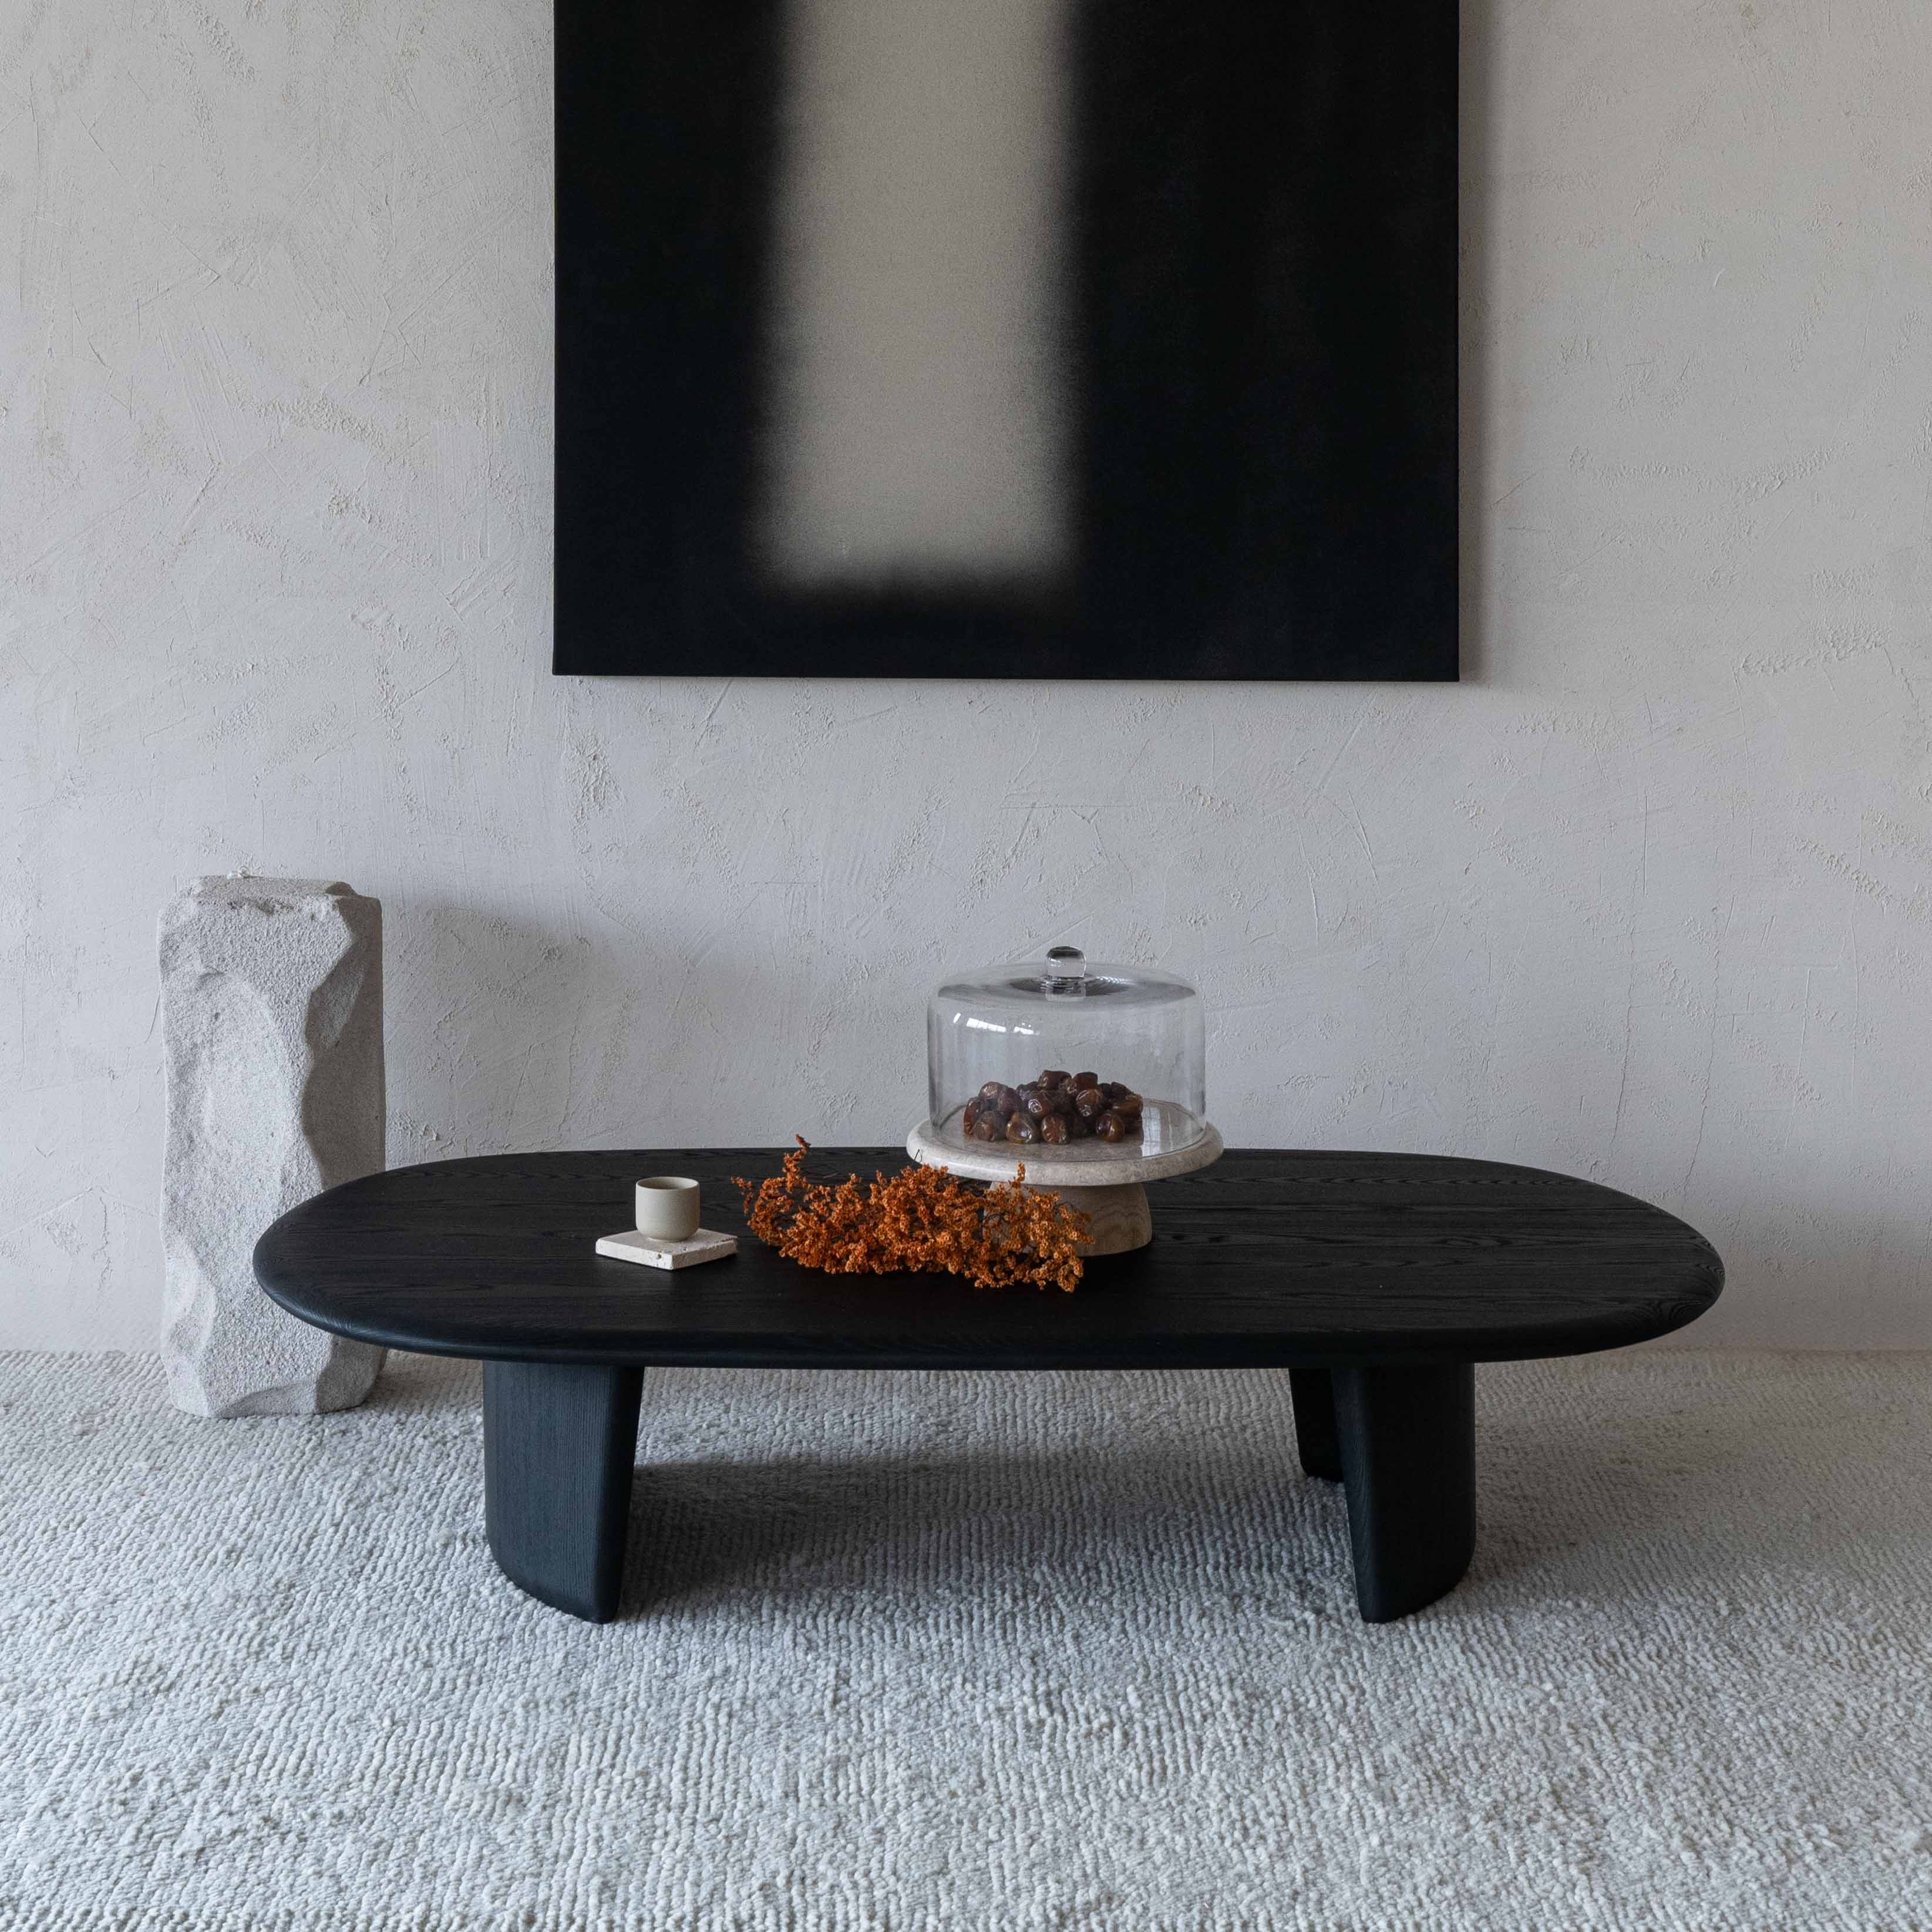 Tima Black Wooden Oval Coffee Table  - WS Living - UAE - Coffee Tables Wood and steel Furnitures - Dubai